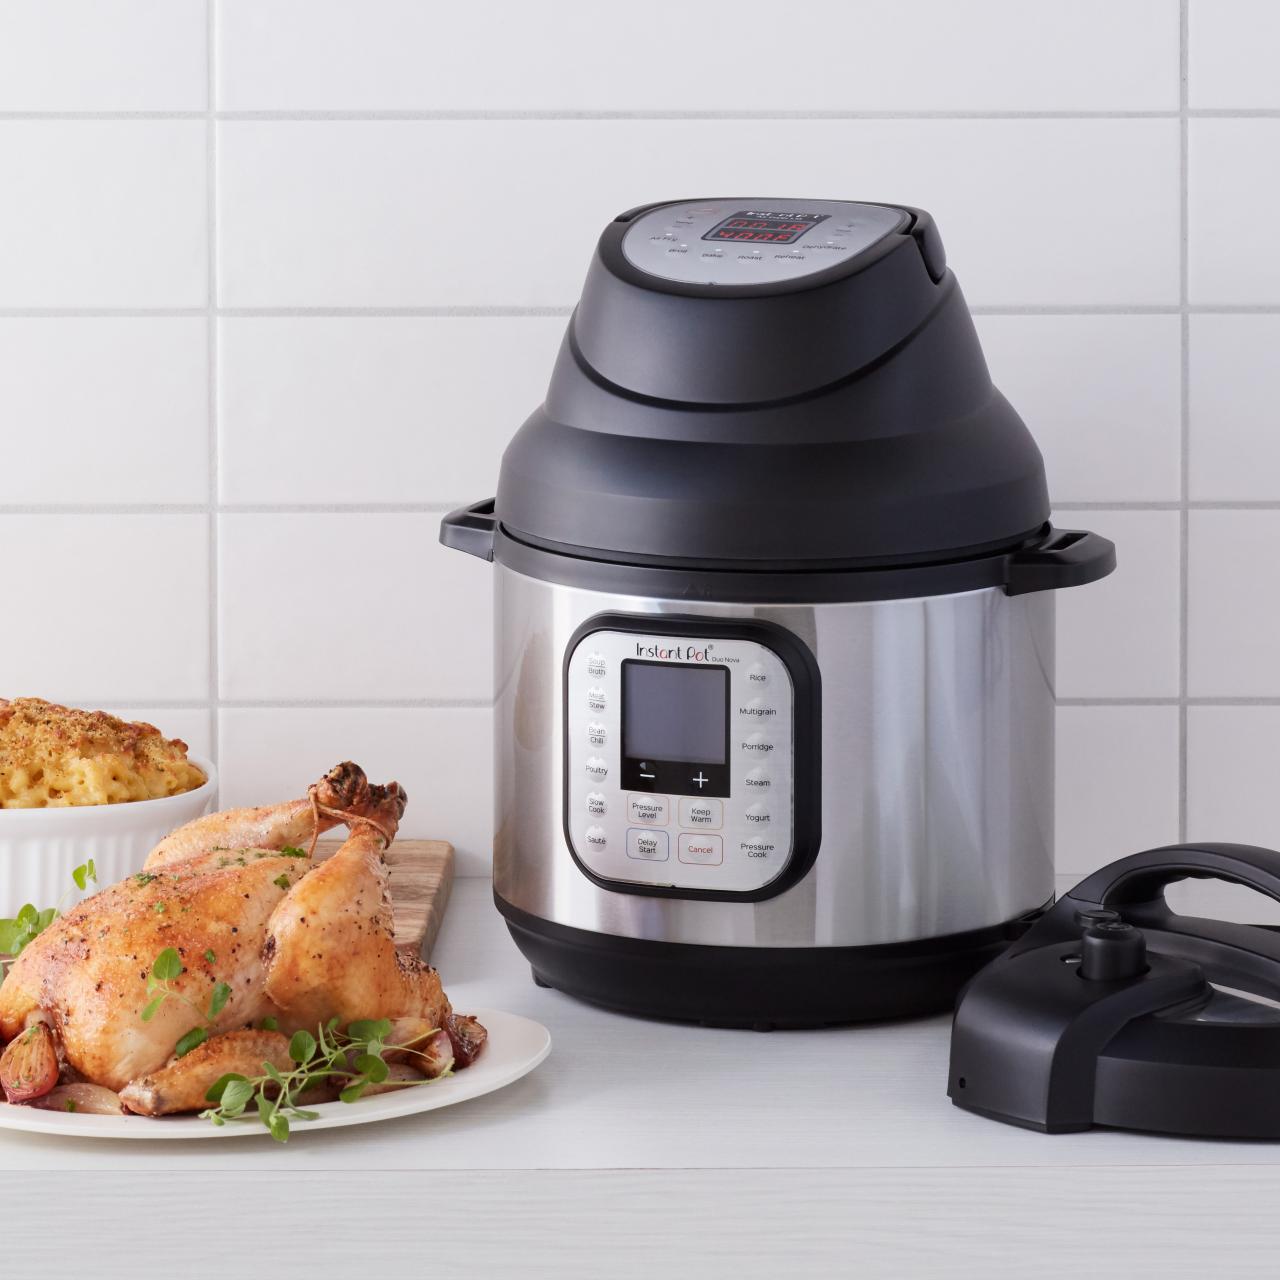 How to Use Instant Pot Air Fryer LidA Basics Tutorial For Beginners 